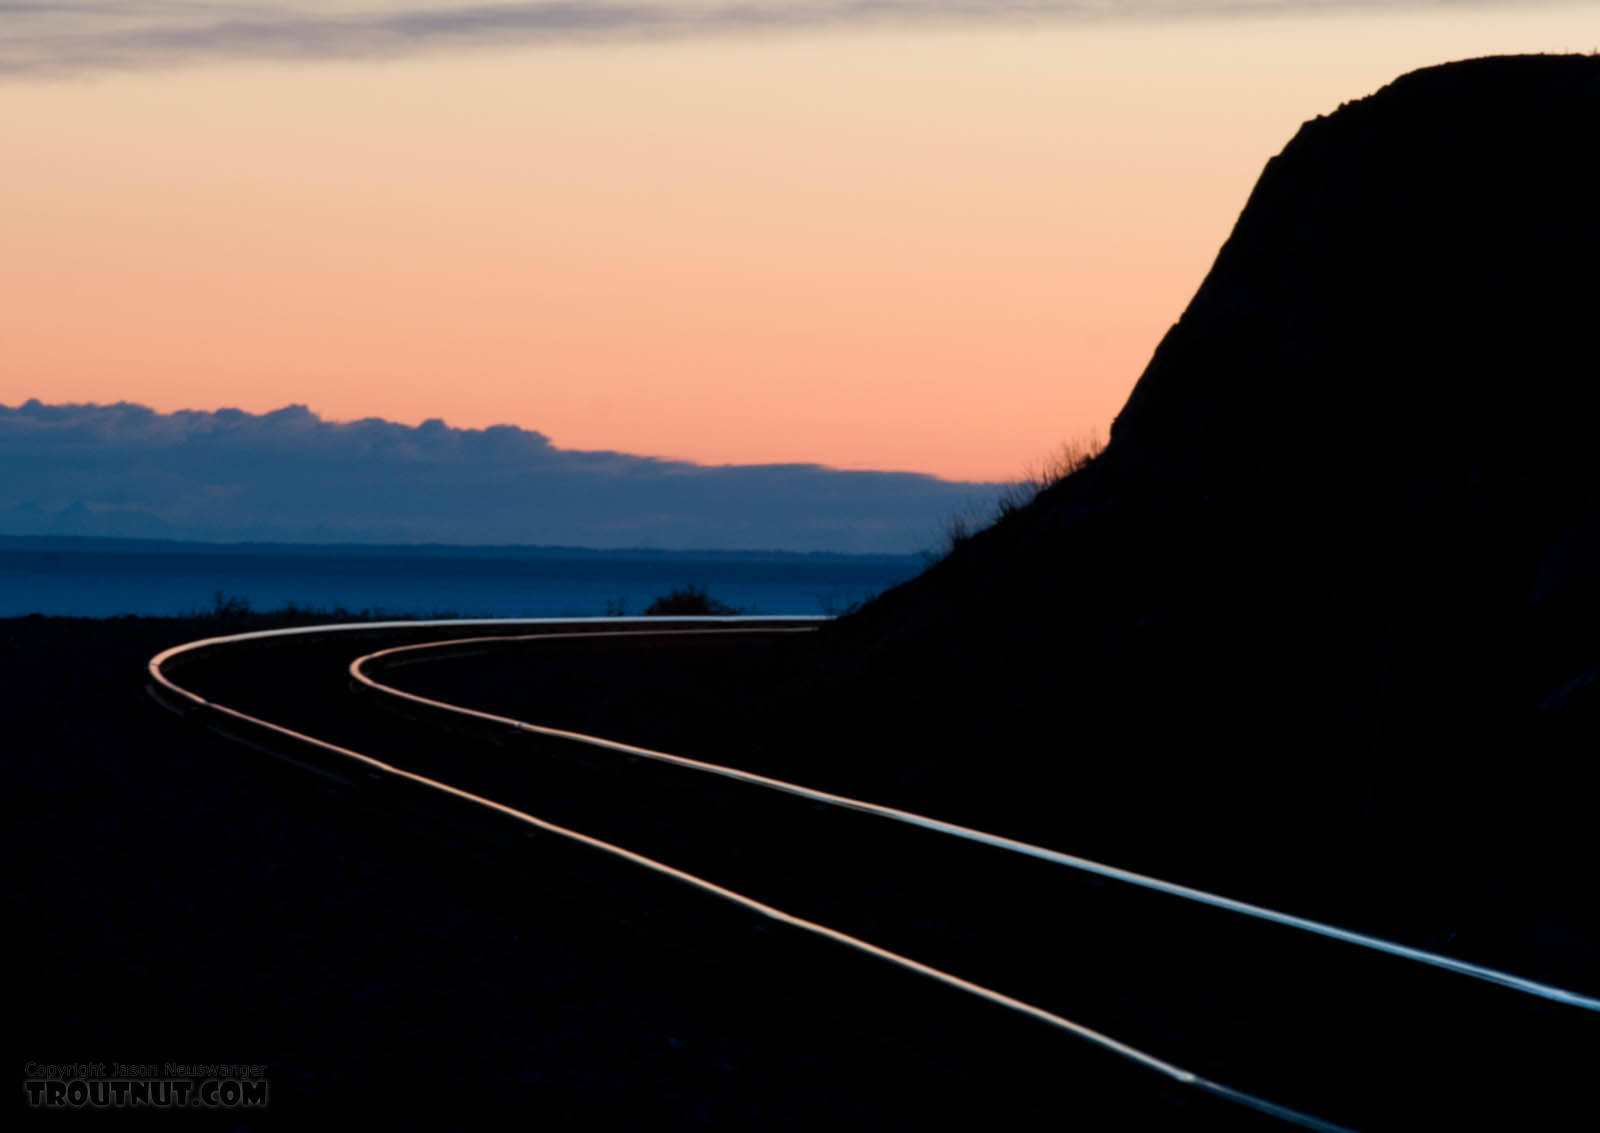 Sunset over the Alaska Railroad tracks along the Turnagain Arm of Cook Inlet, photographed on my drive back home to Fairbanks from the Kenai Peninsula. From Turnagain Arm of Cook Inlet in Alaska.